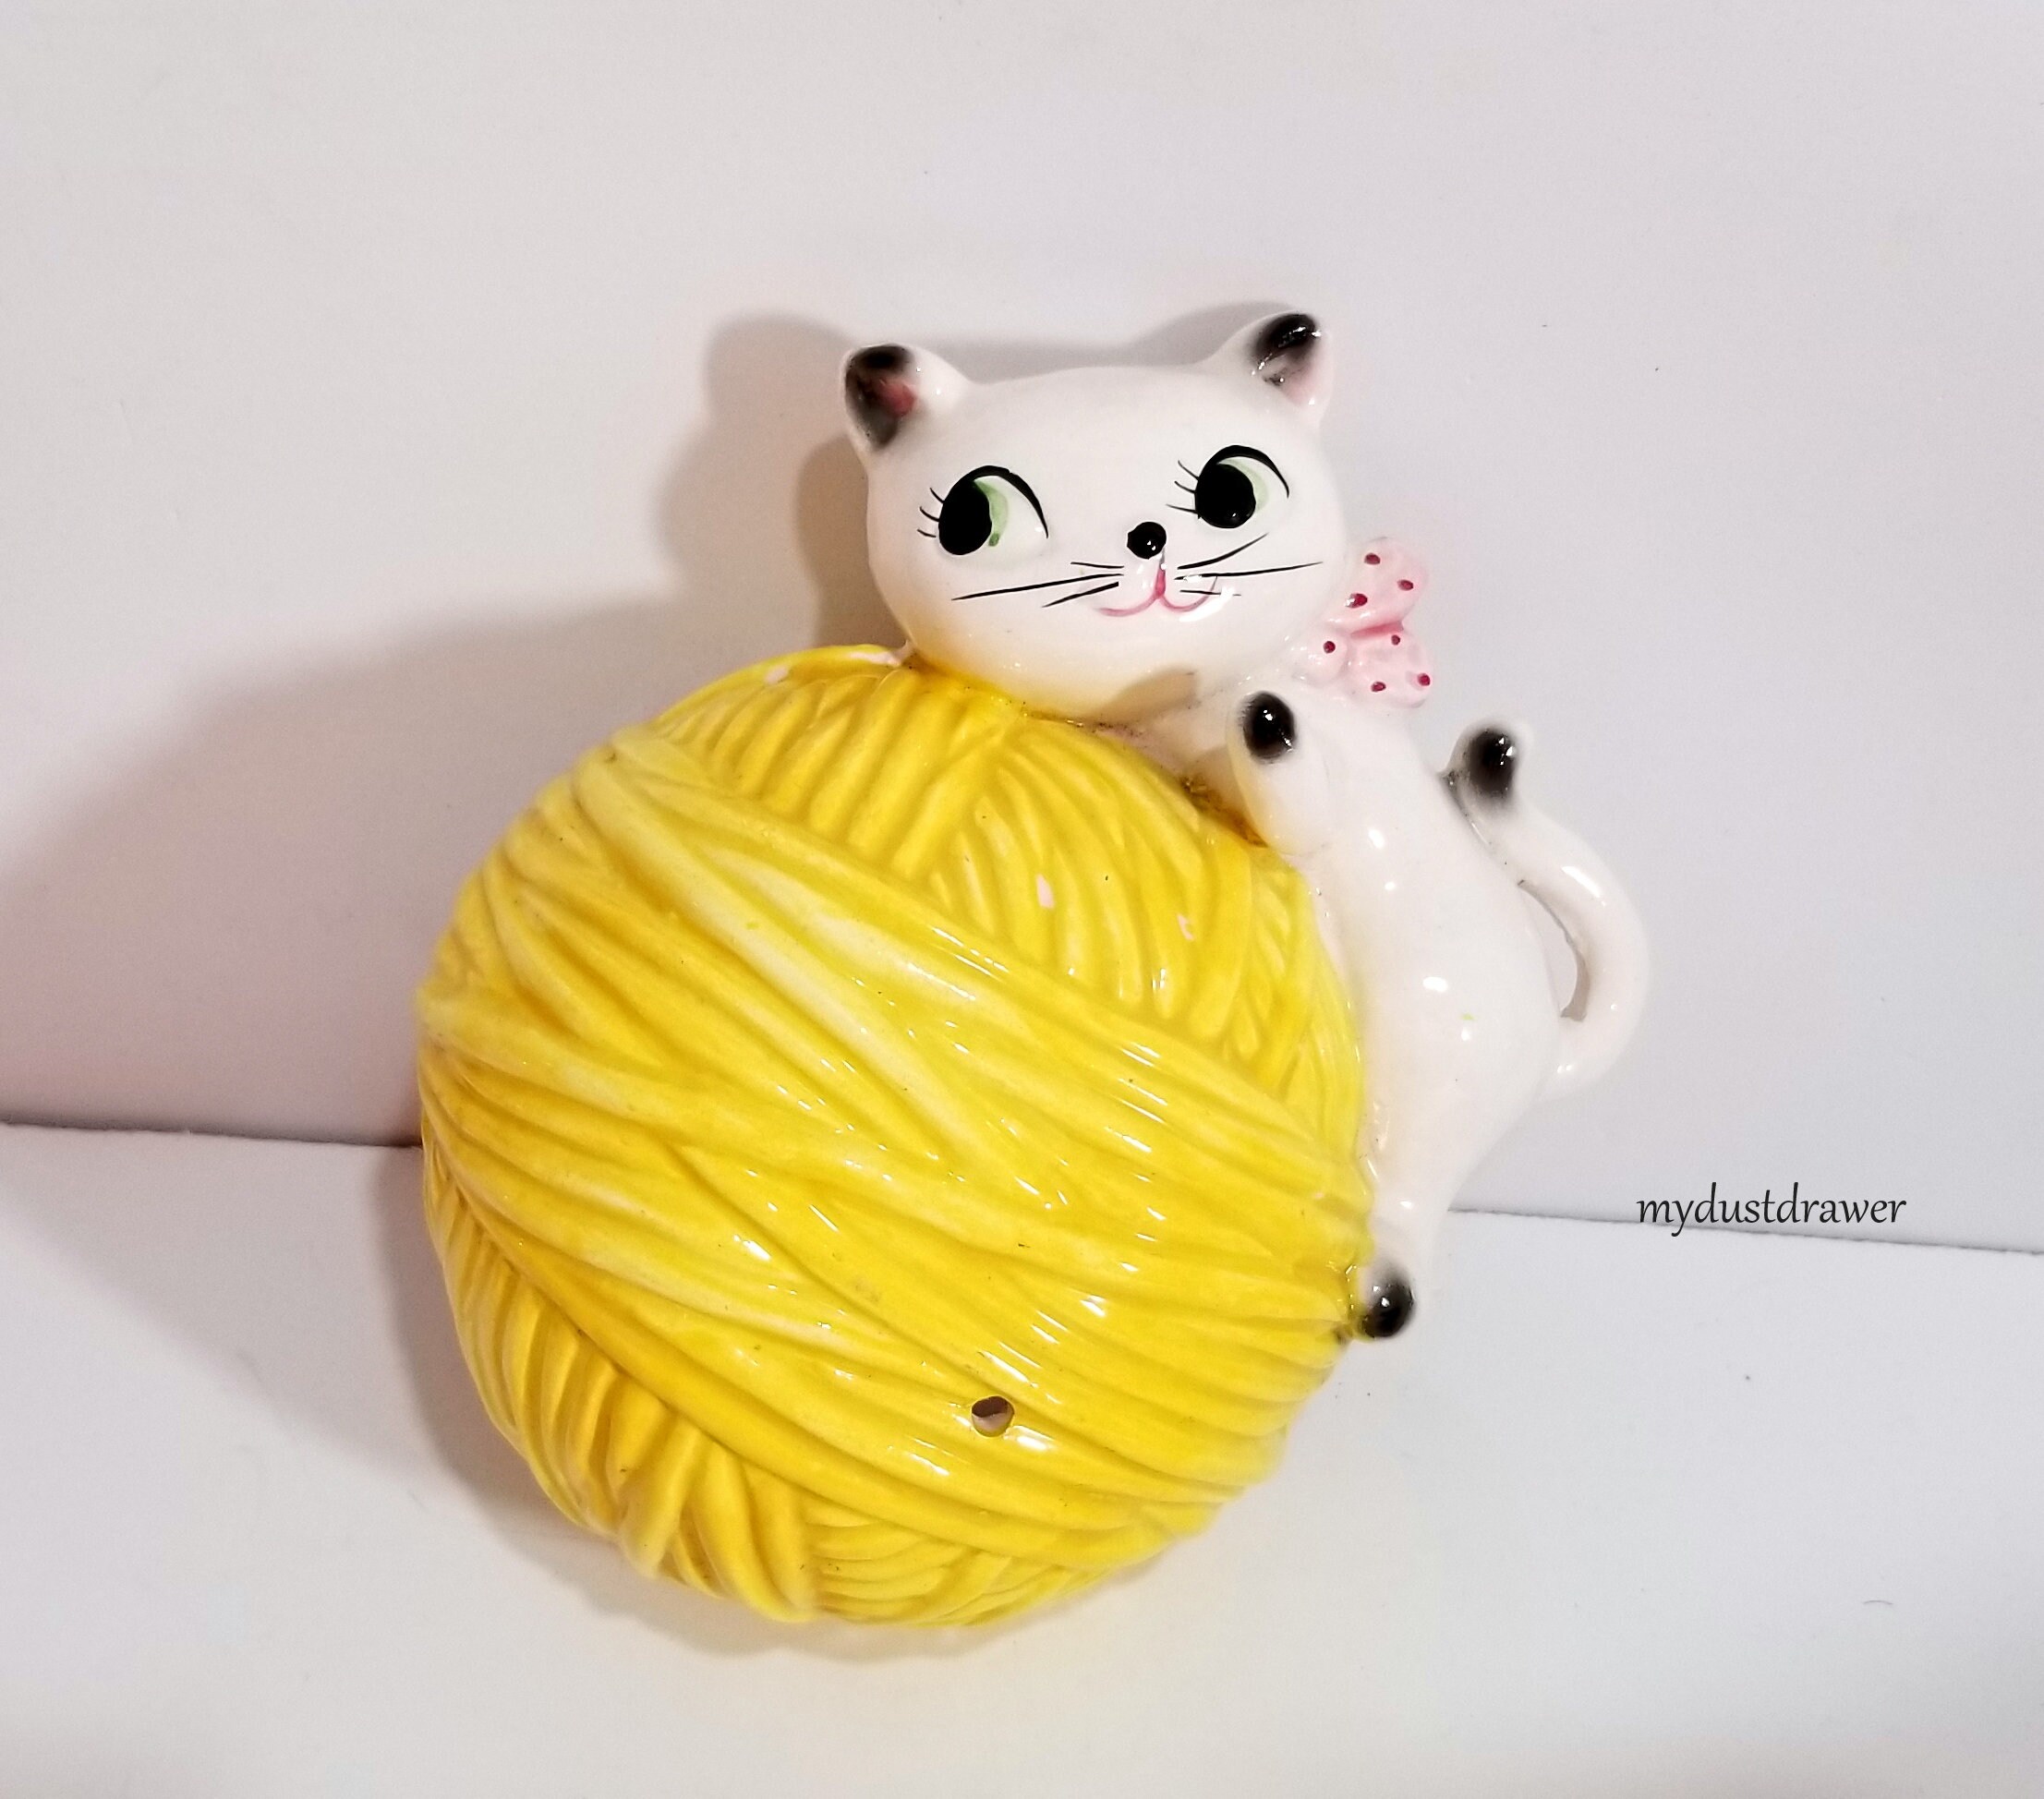 Embroidery Floss Holder Cat Theme - Hither and Yon Studio